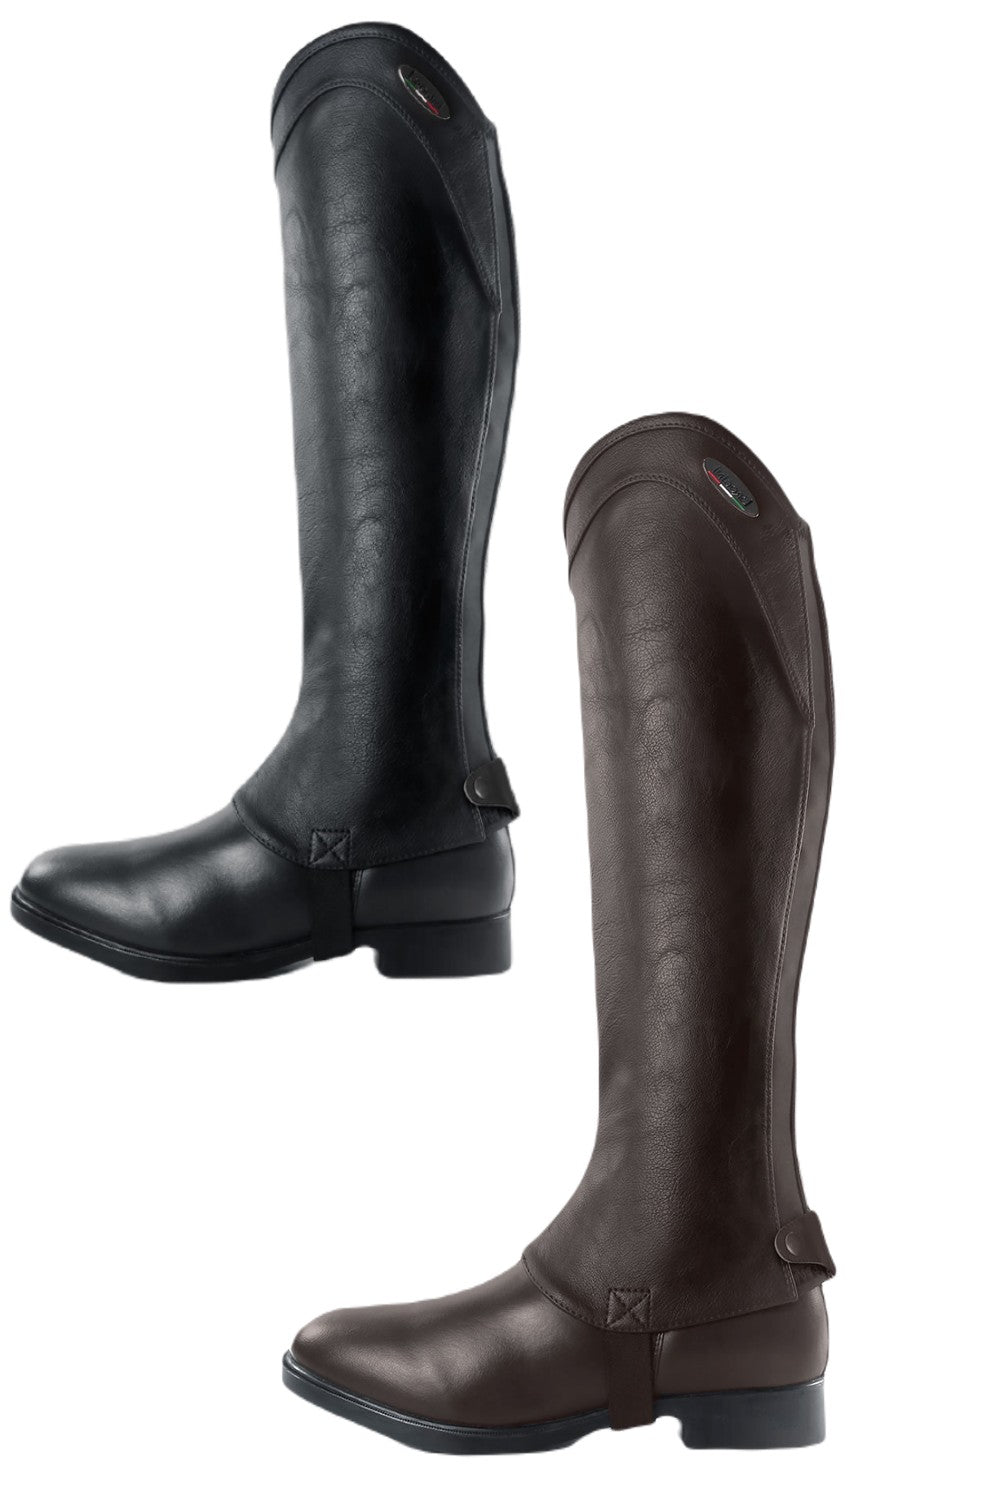 Brogini Marconia Easy Care Gaiters in Black and Brown